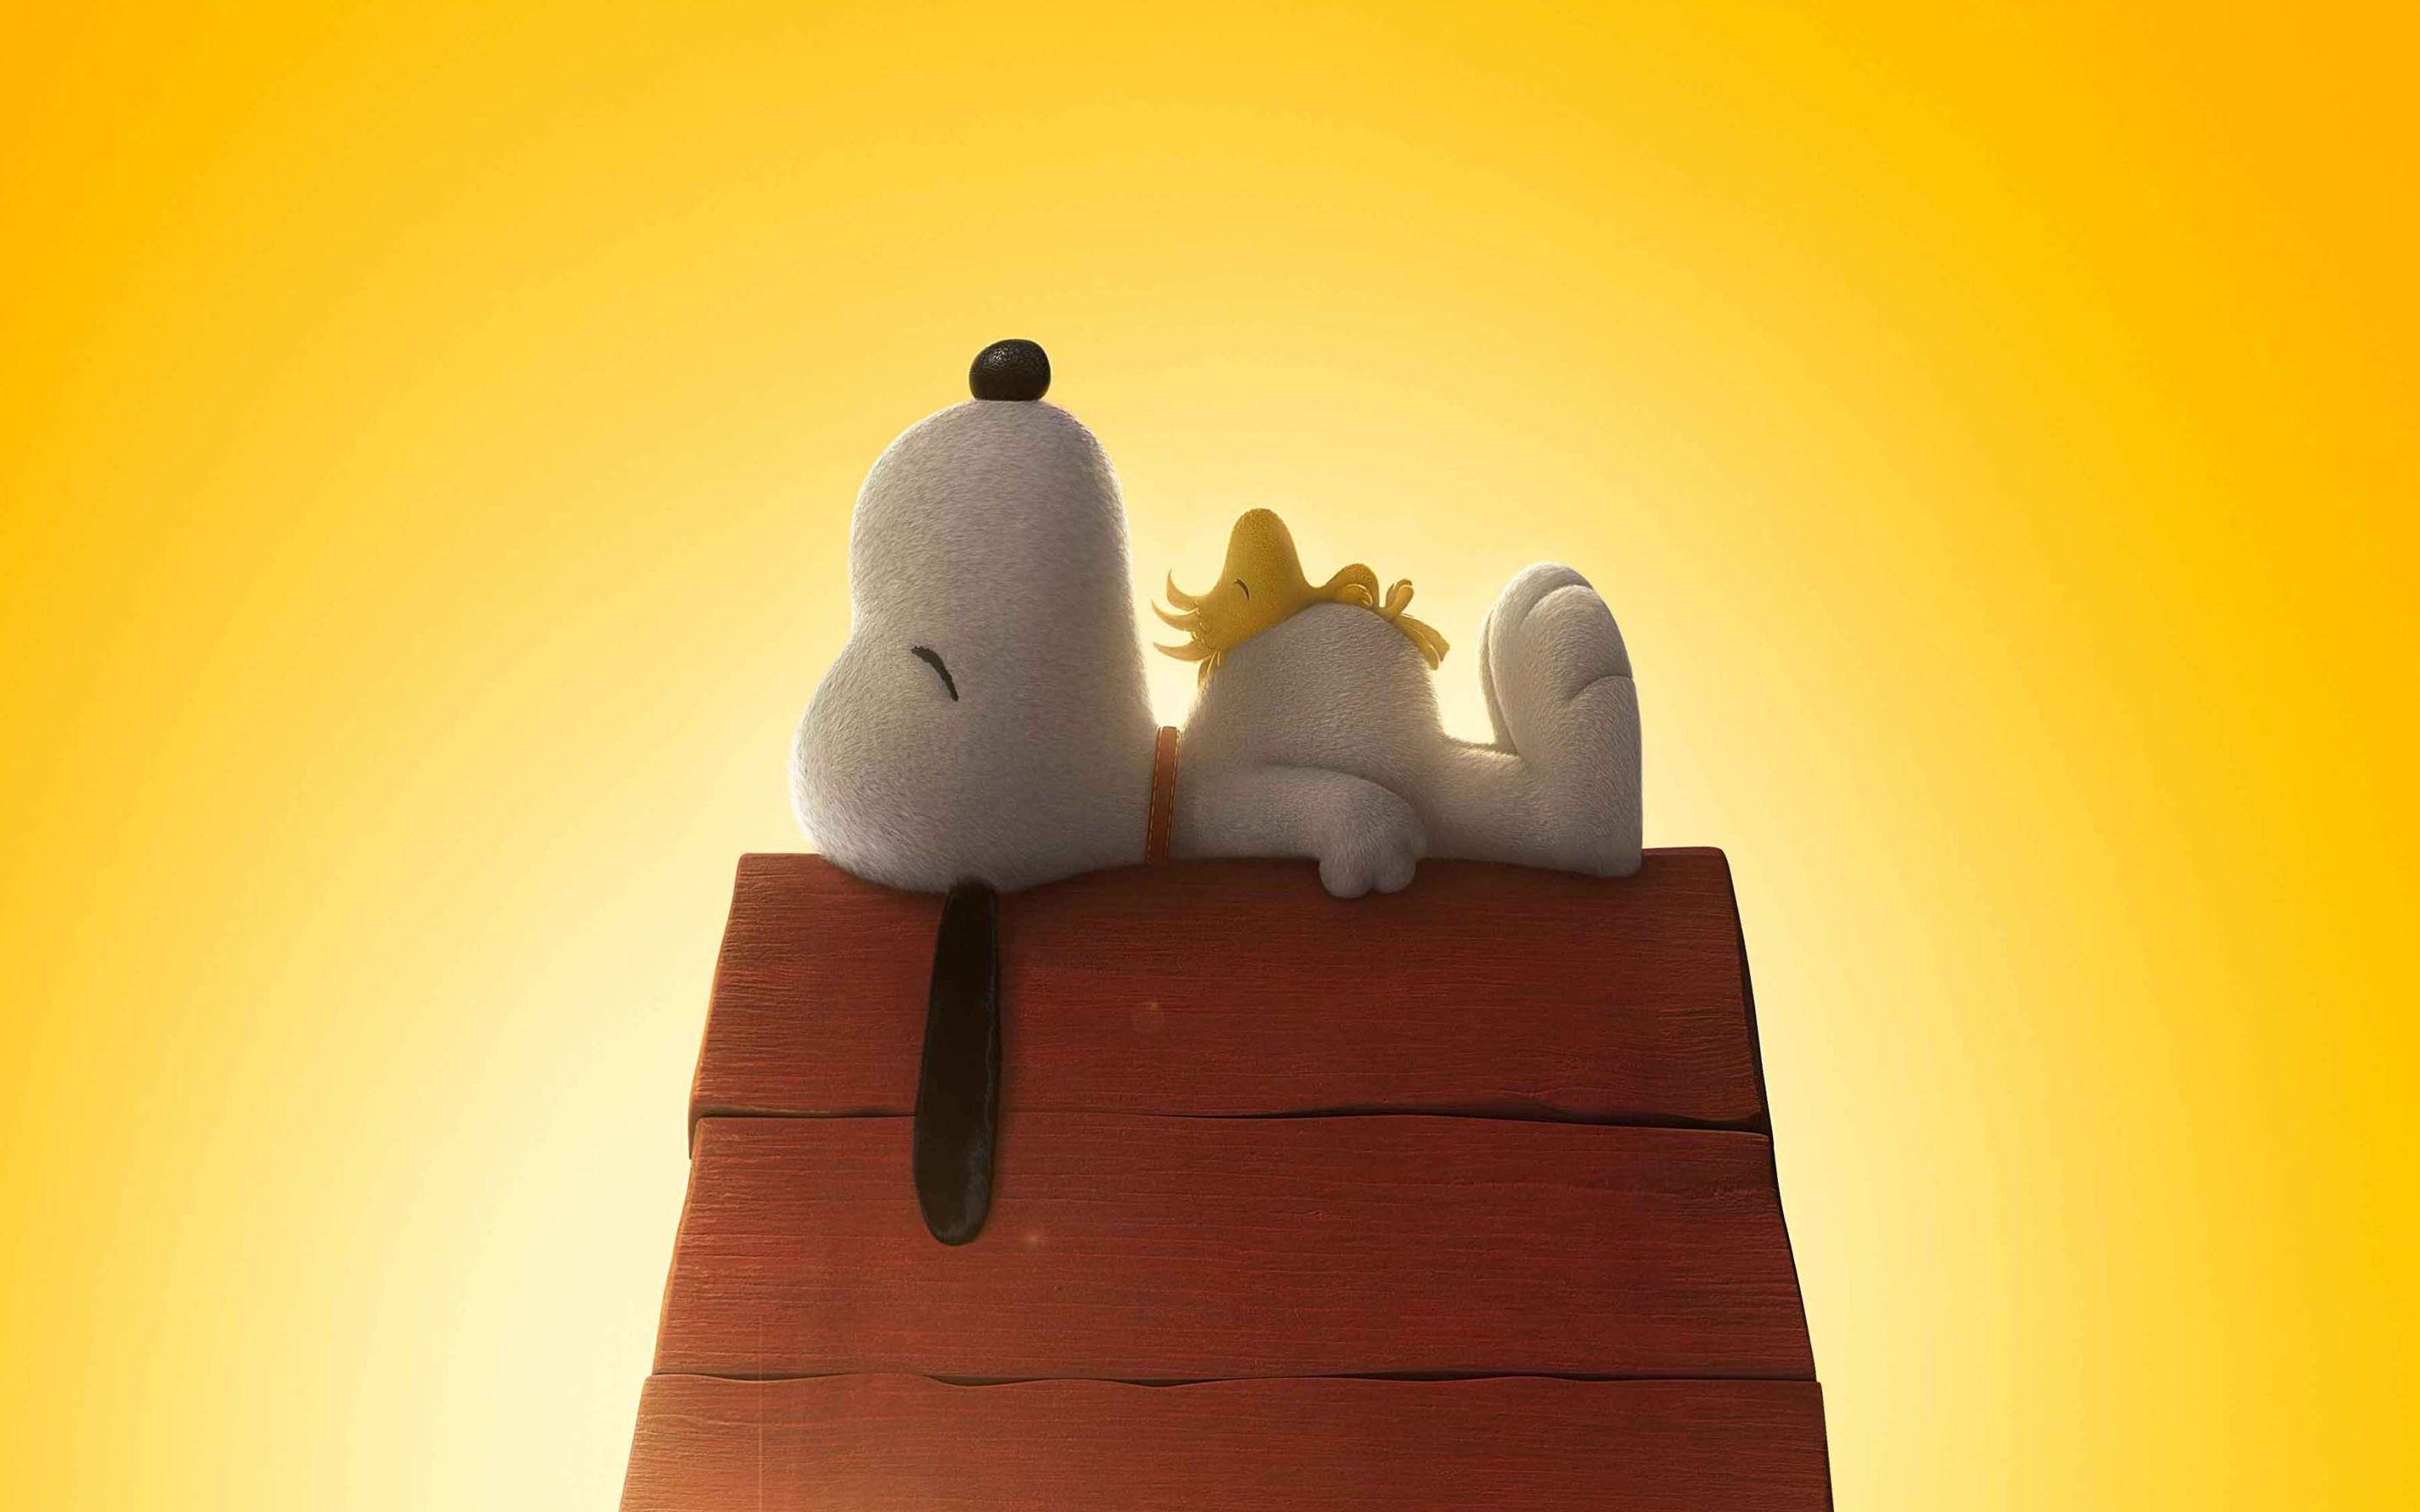 Peanuts 2015 Movie Wallpapers | HD Wallpapers